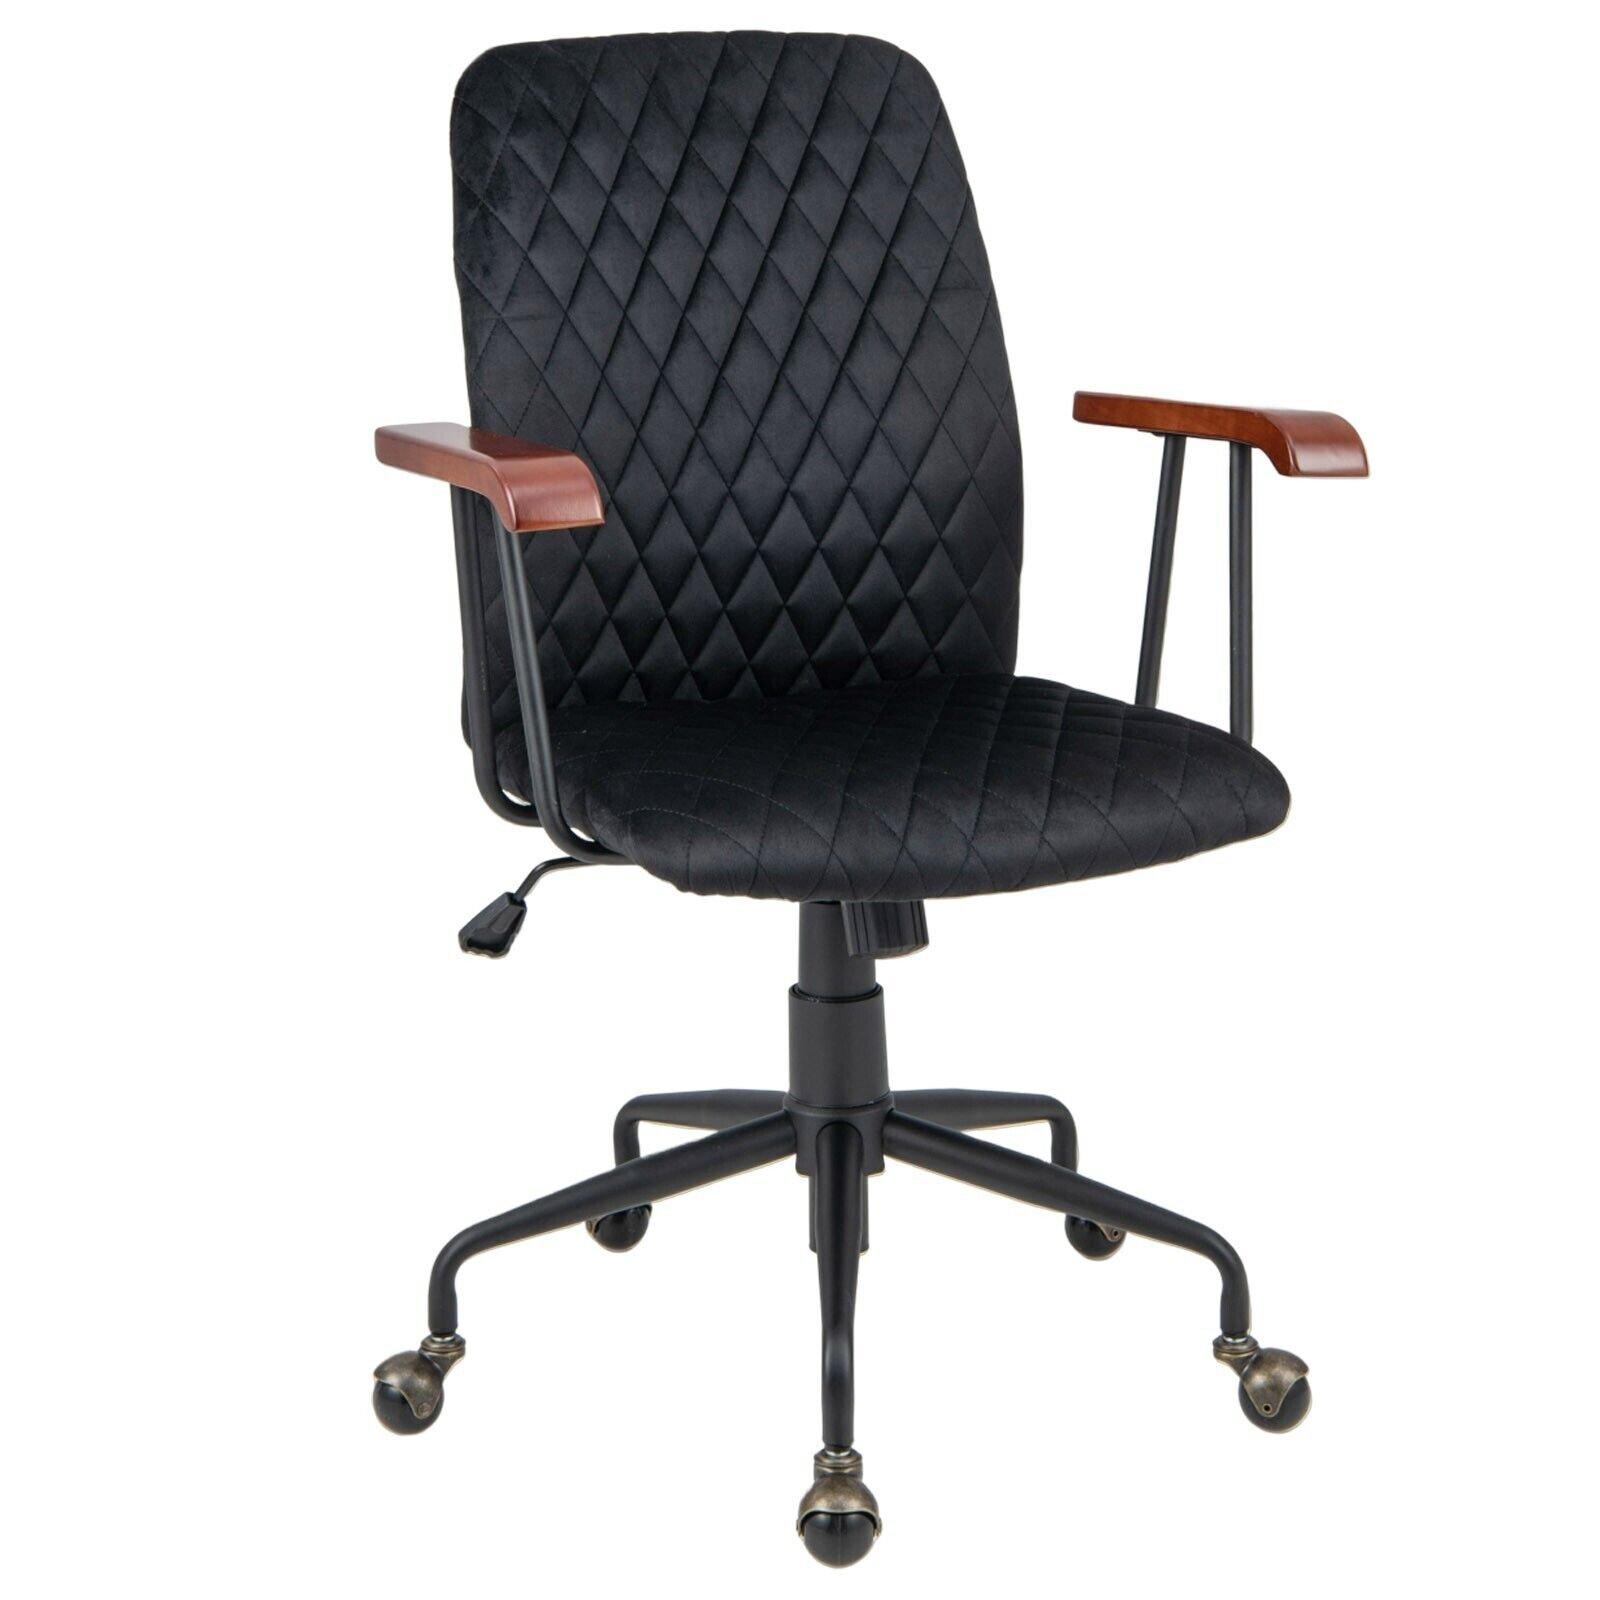 Velvet Leisure Chair Adjustable Swivel Home Office Chair Rolling Computer Chair Black